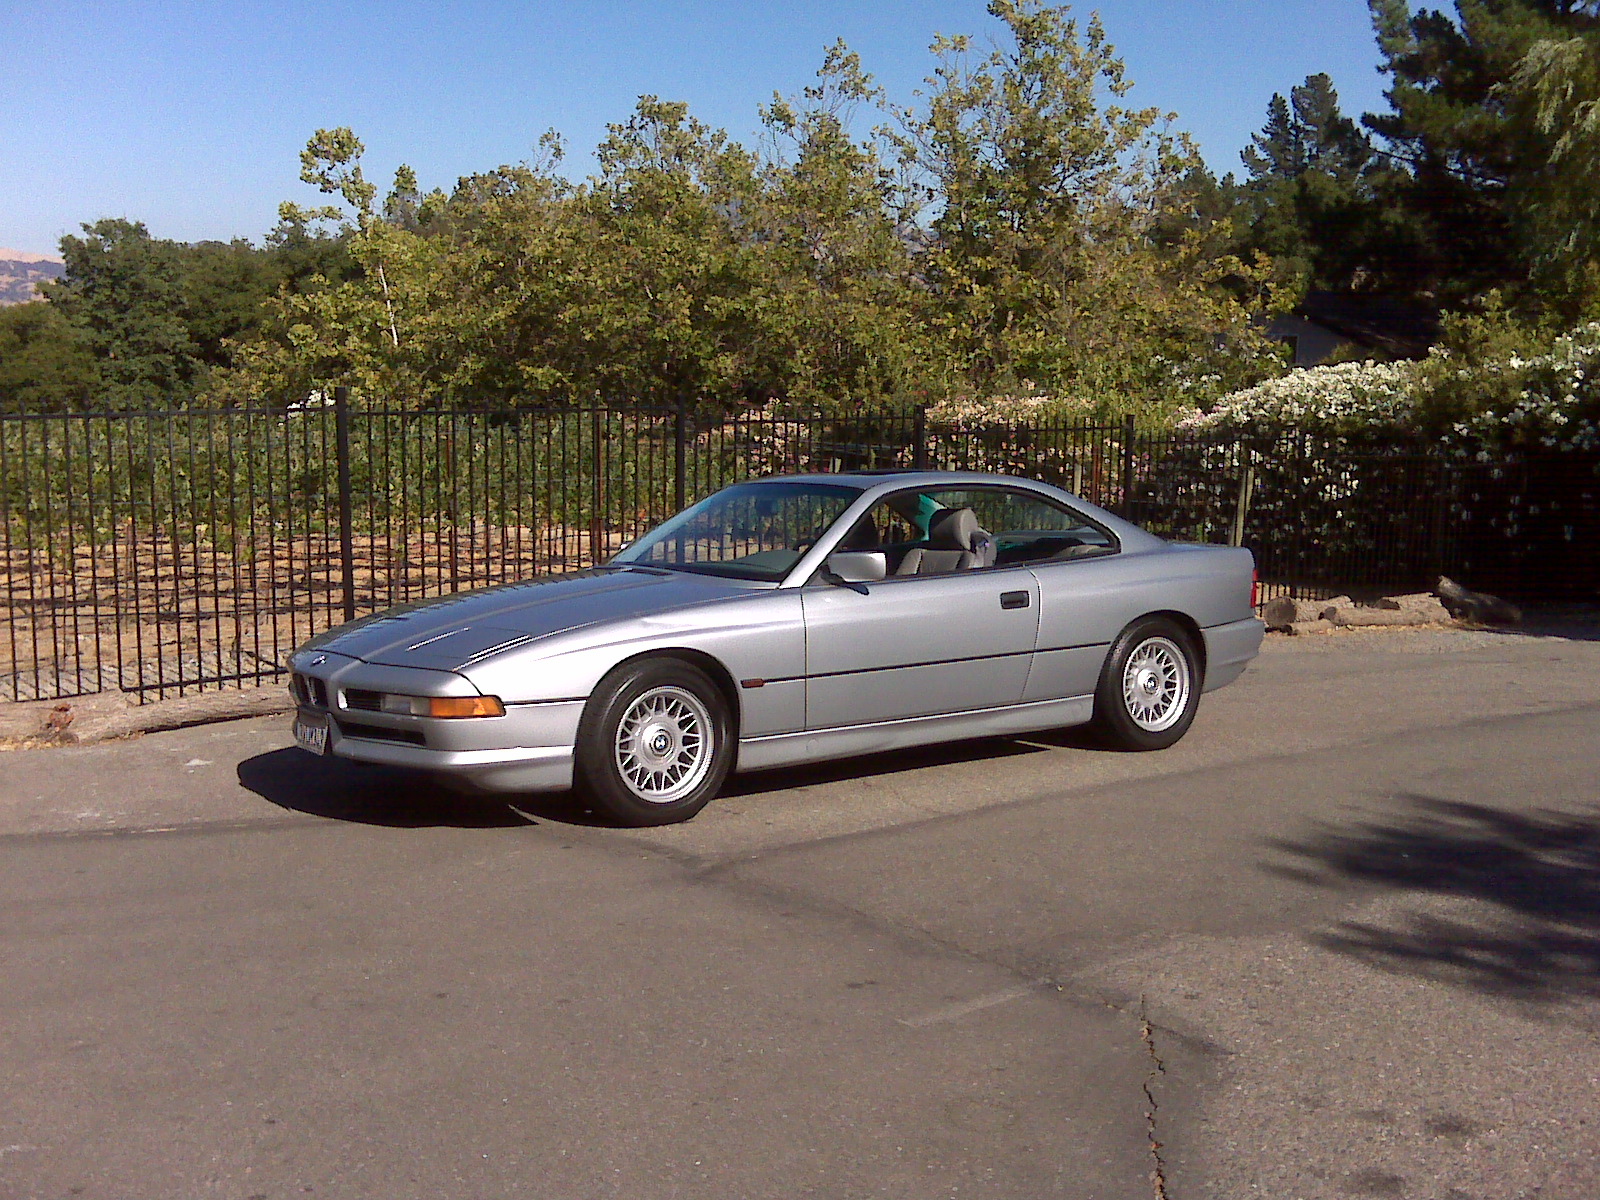 I've just spent the week driving around in an immaculate 1997 BMW 840ci,